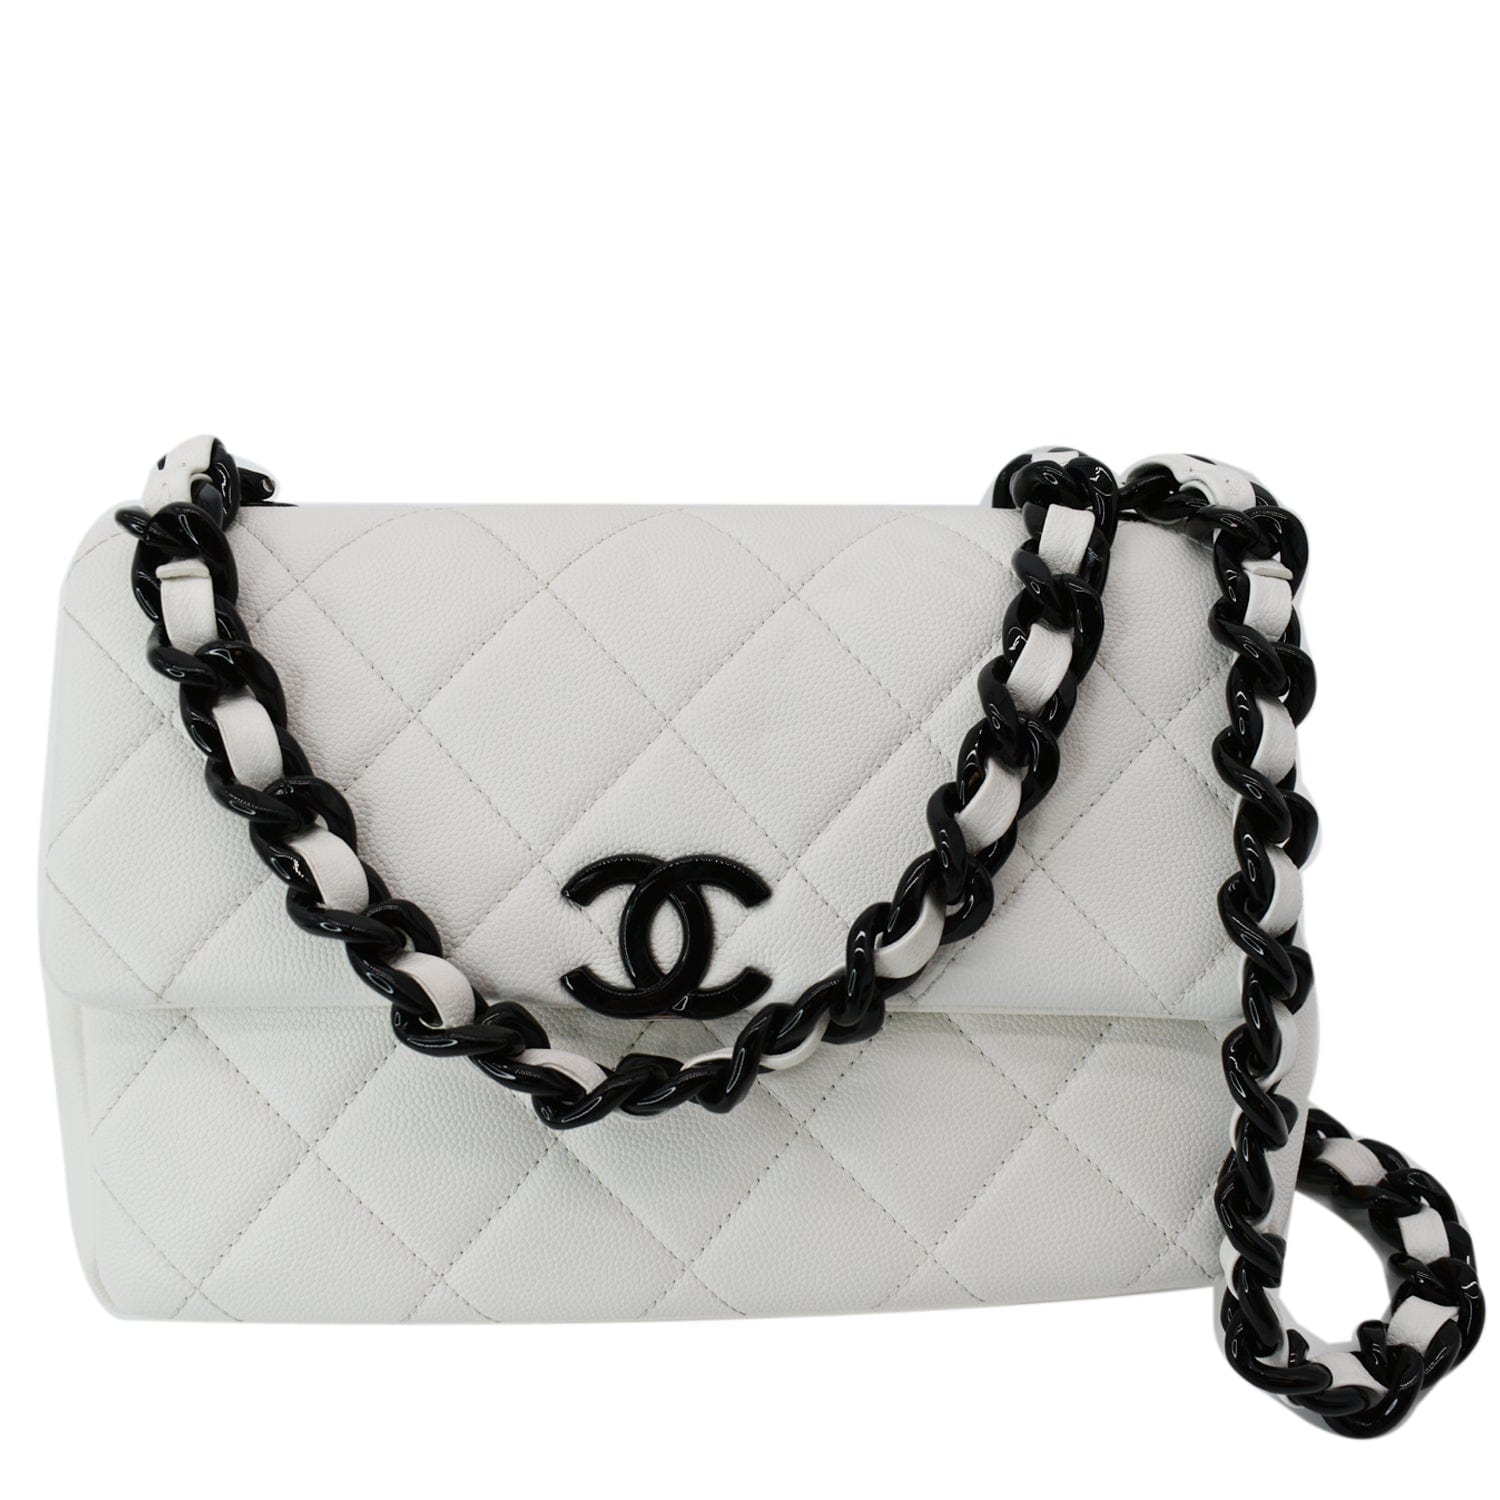 22S CHANEL Classic Sky Blue Caviar WOC Wallet On Chain GHW NWT